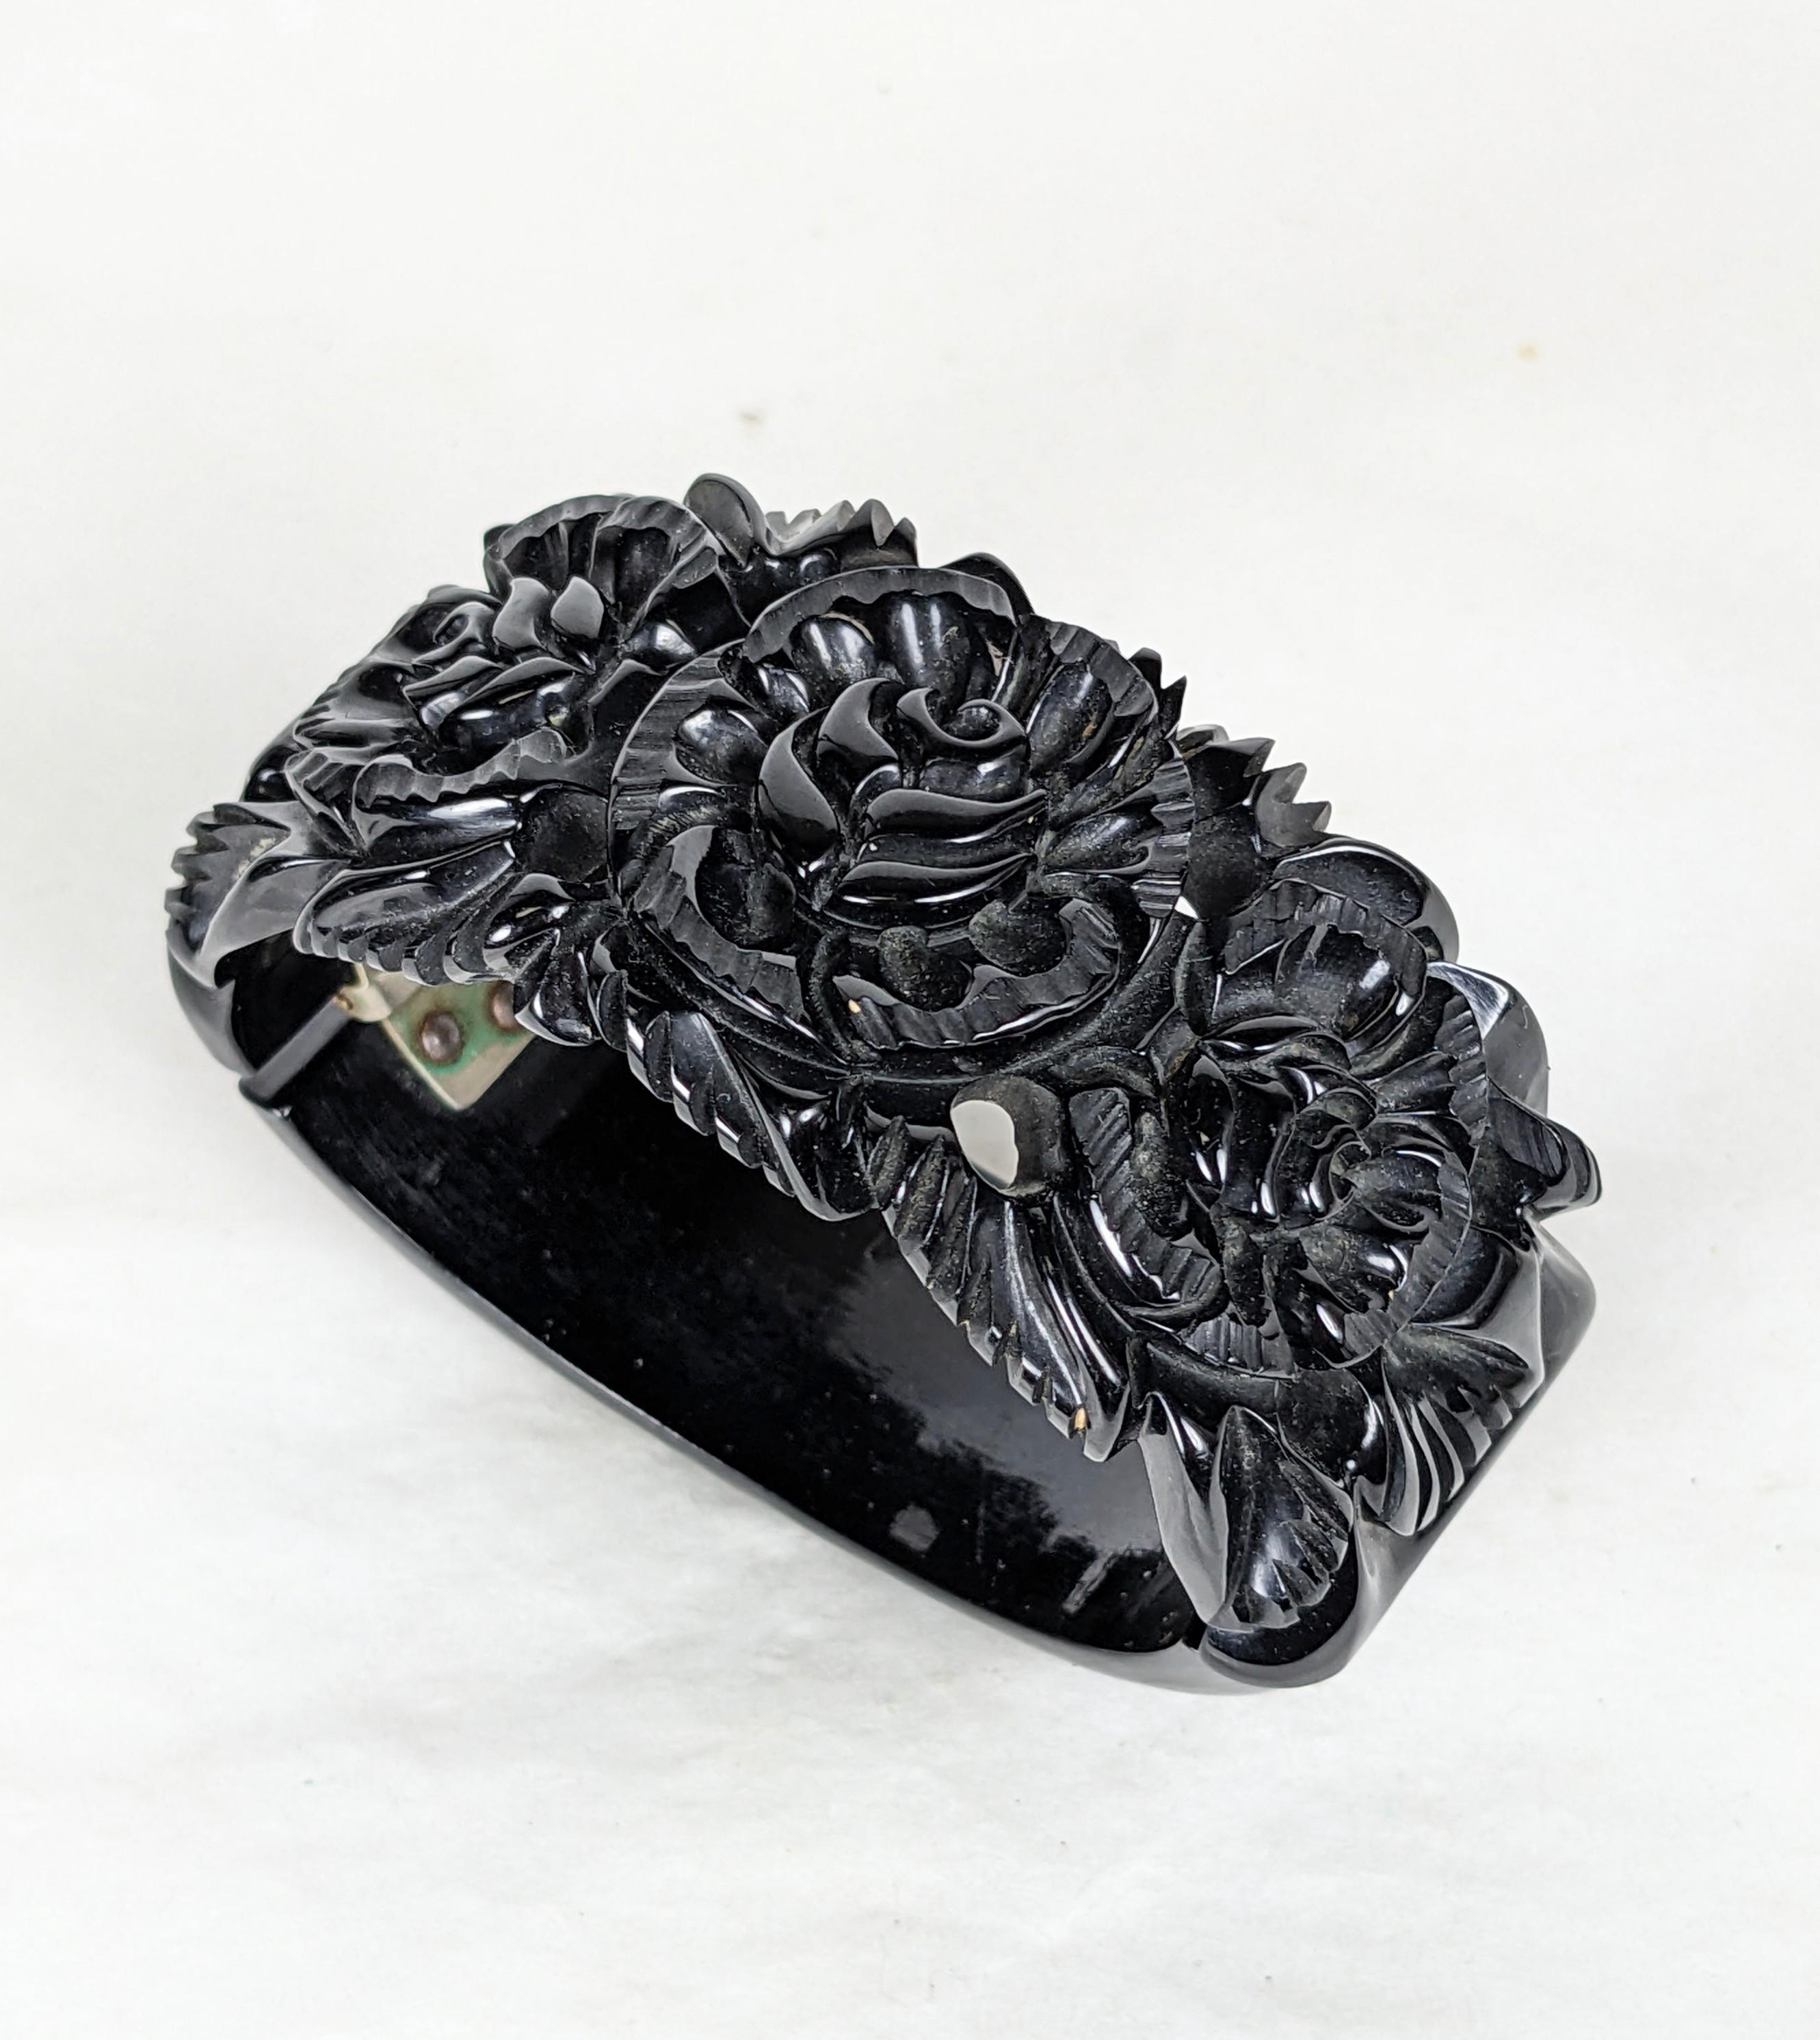 Art Deco Carved Bakelite Clamper Cuff from the 1930's. Hand carved black bakelite with ornate rose and leaf designs. Spring closure. 1.25